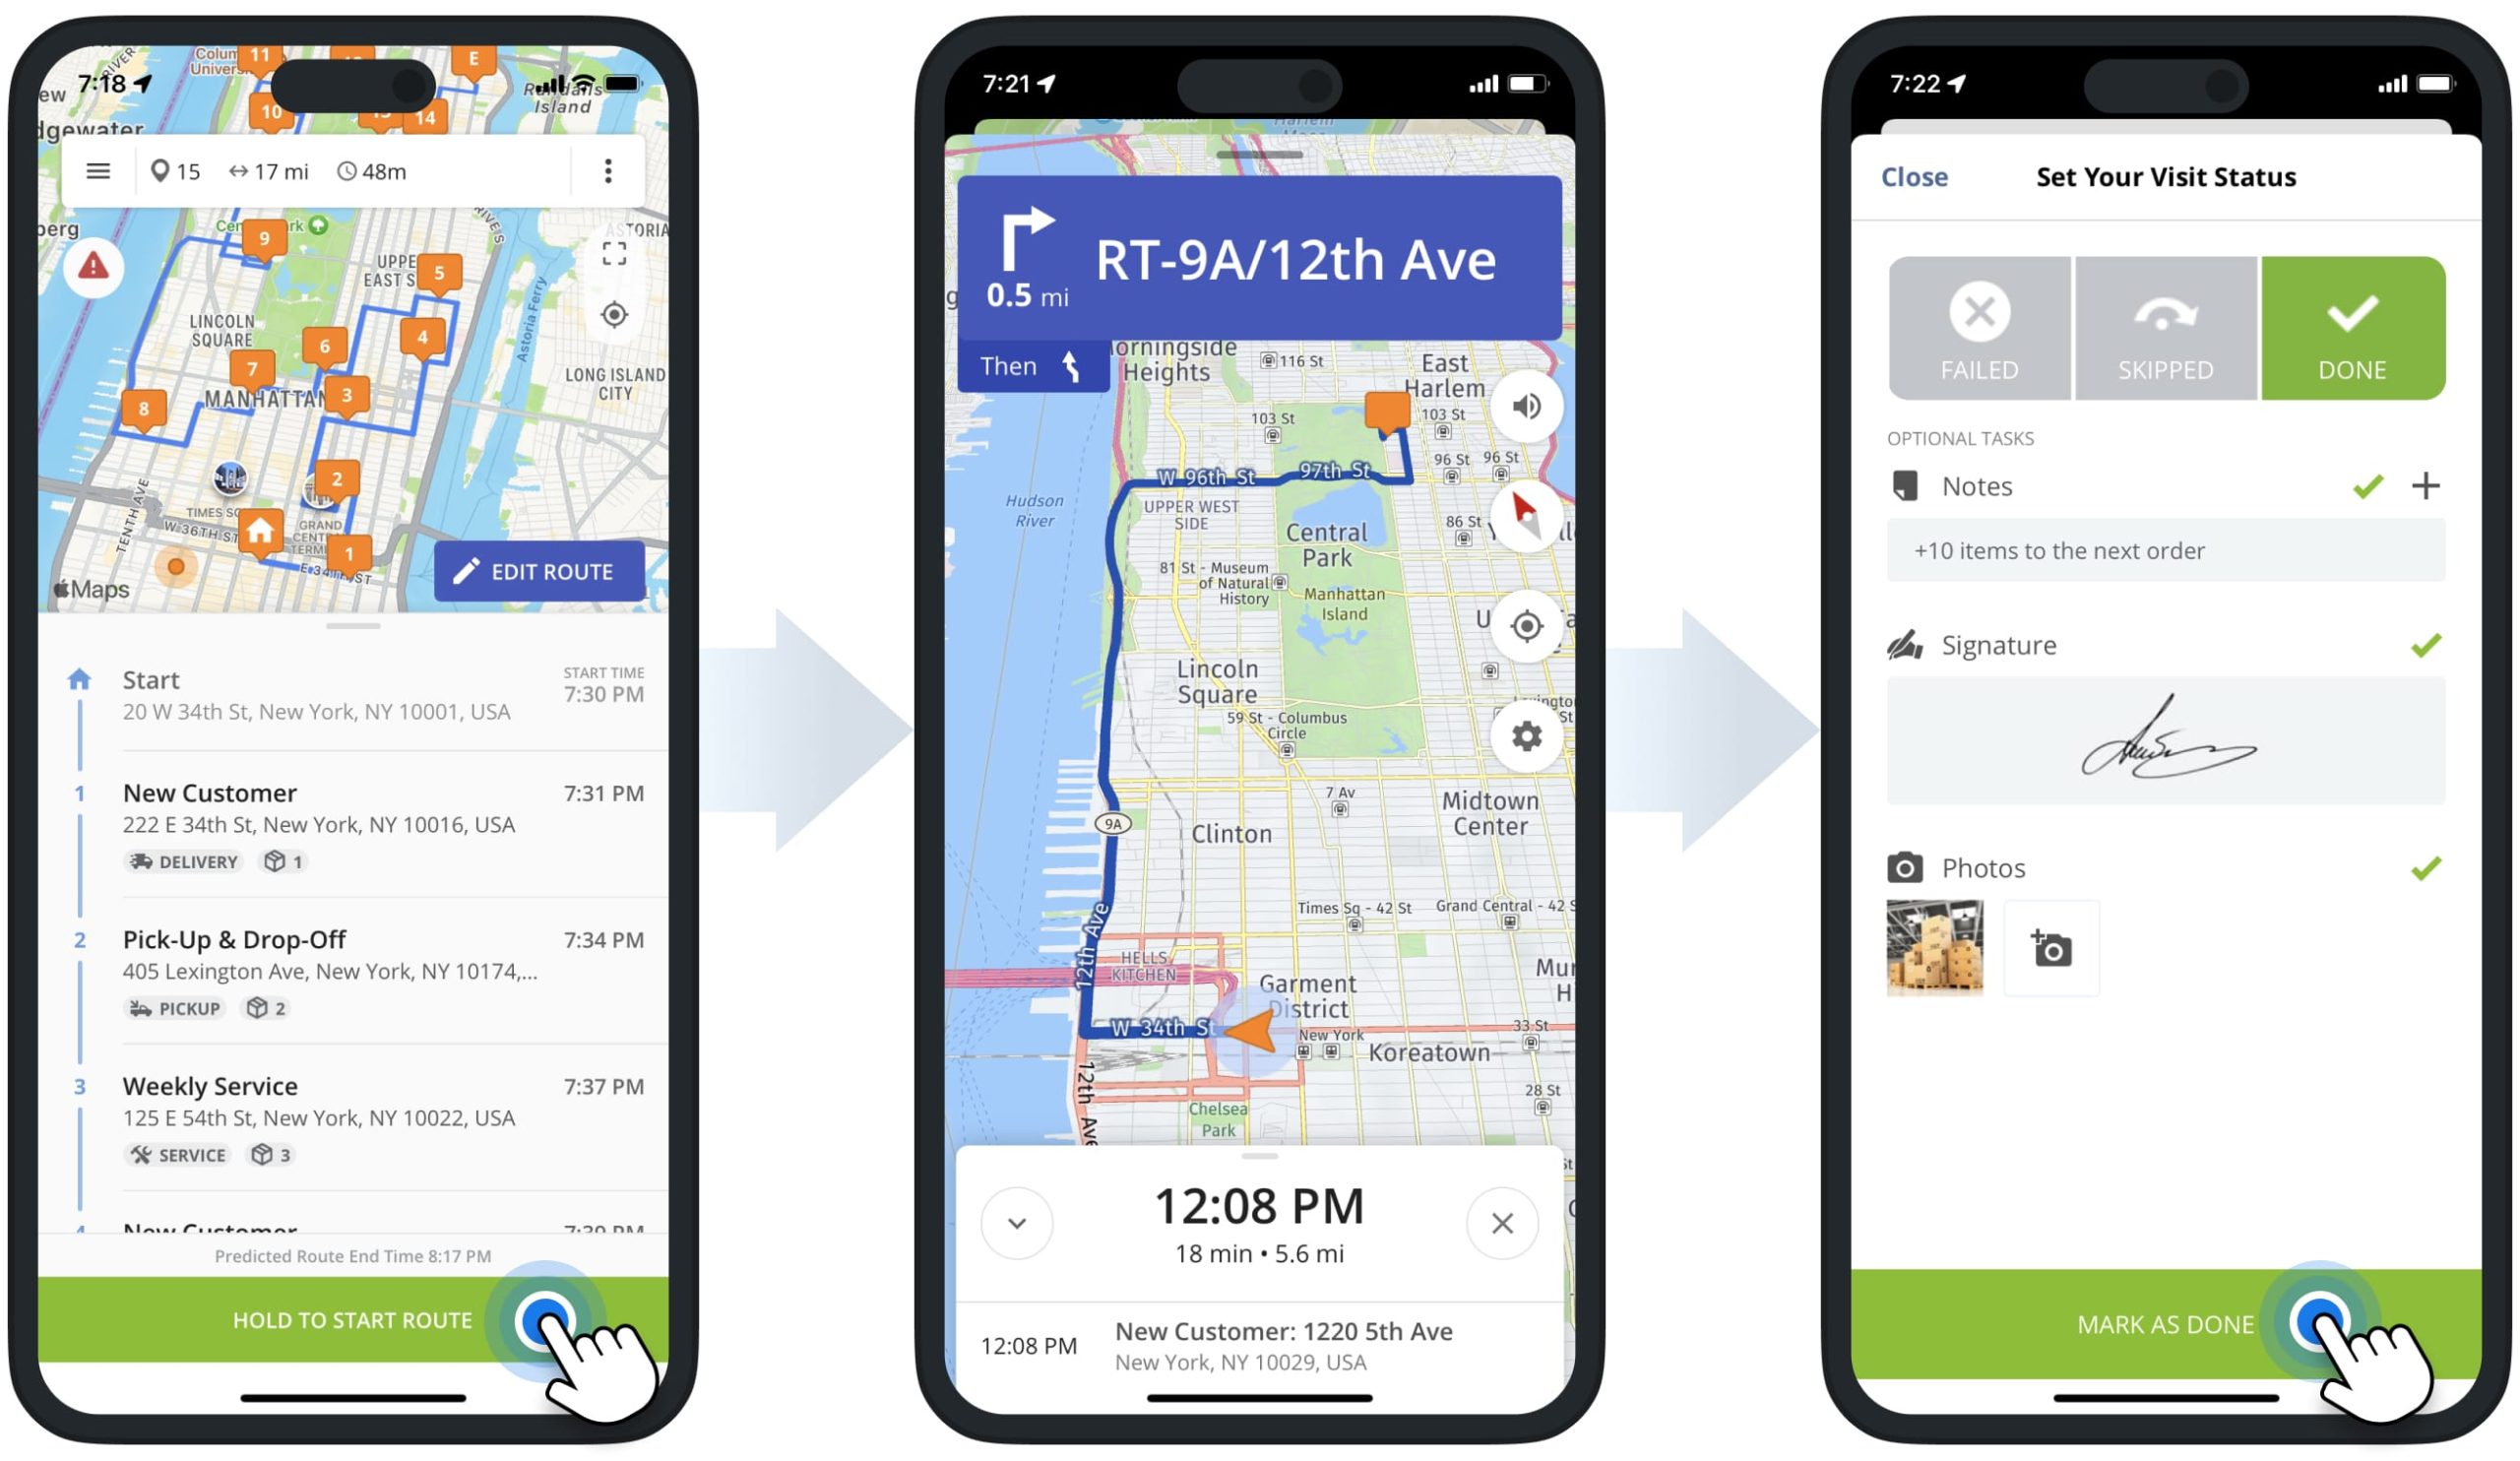 iPhone Route Planner app offline supported features for navigating routes, attaching proof of visit, and completing routes with no internet connection.